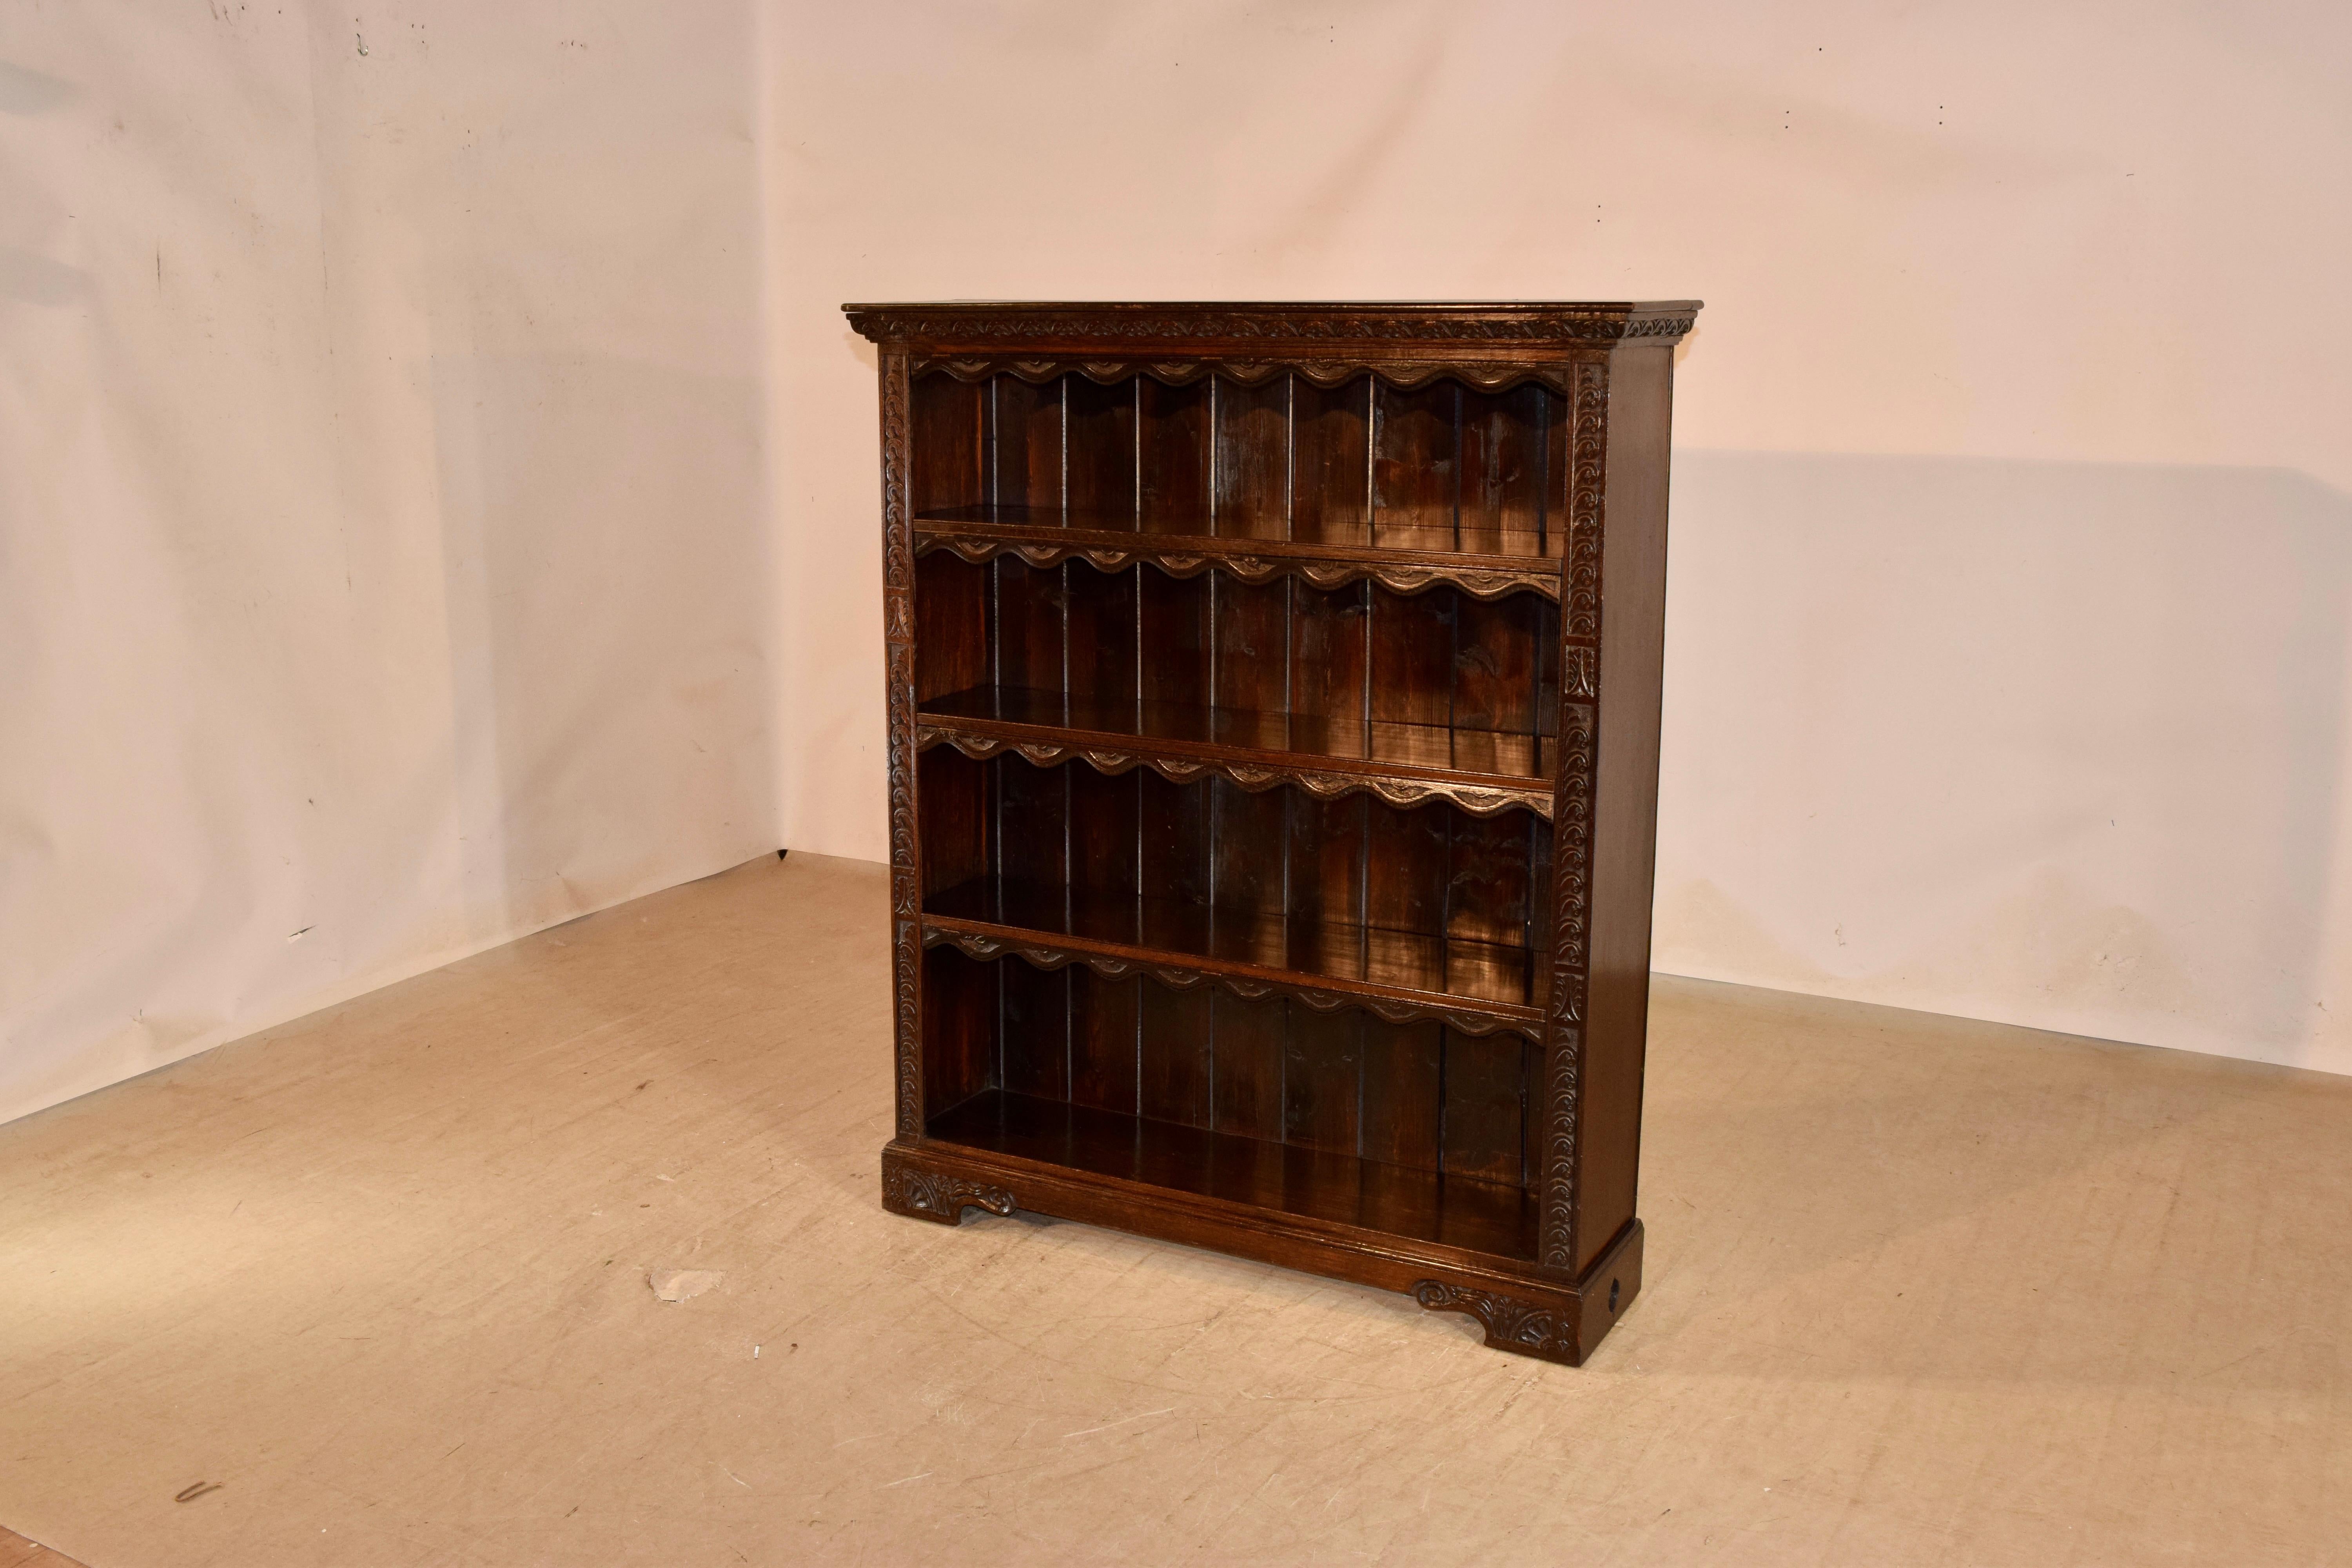 19th Century oak bookcase from England with a hand carved decorated frame and three shelves, all with very unusual carved wooden dust flaps that are hinged for lifting to access taller books. The sides are simple and the case is resting on lovely